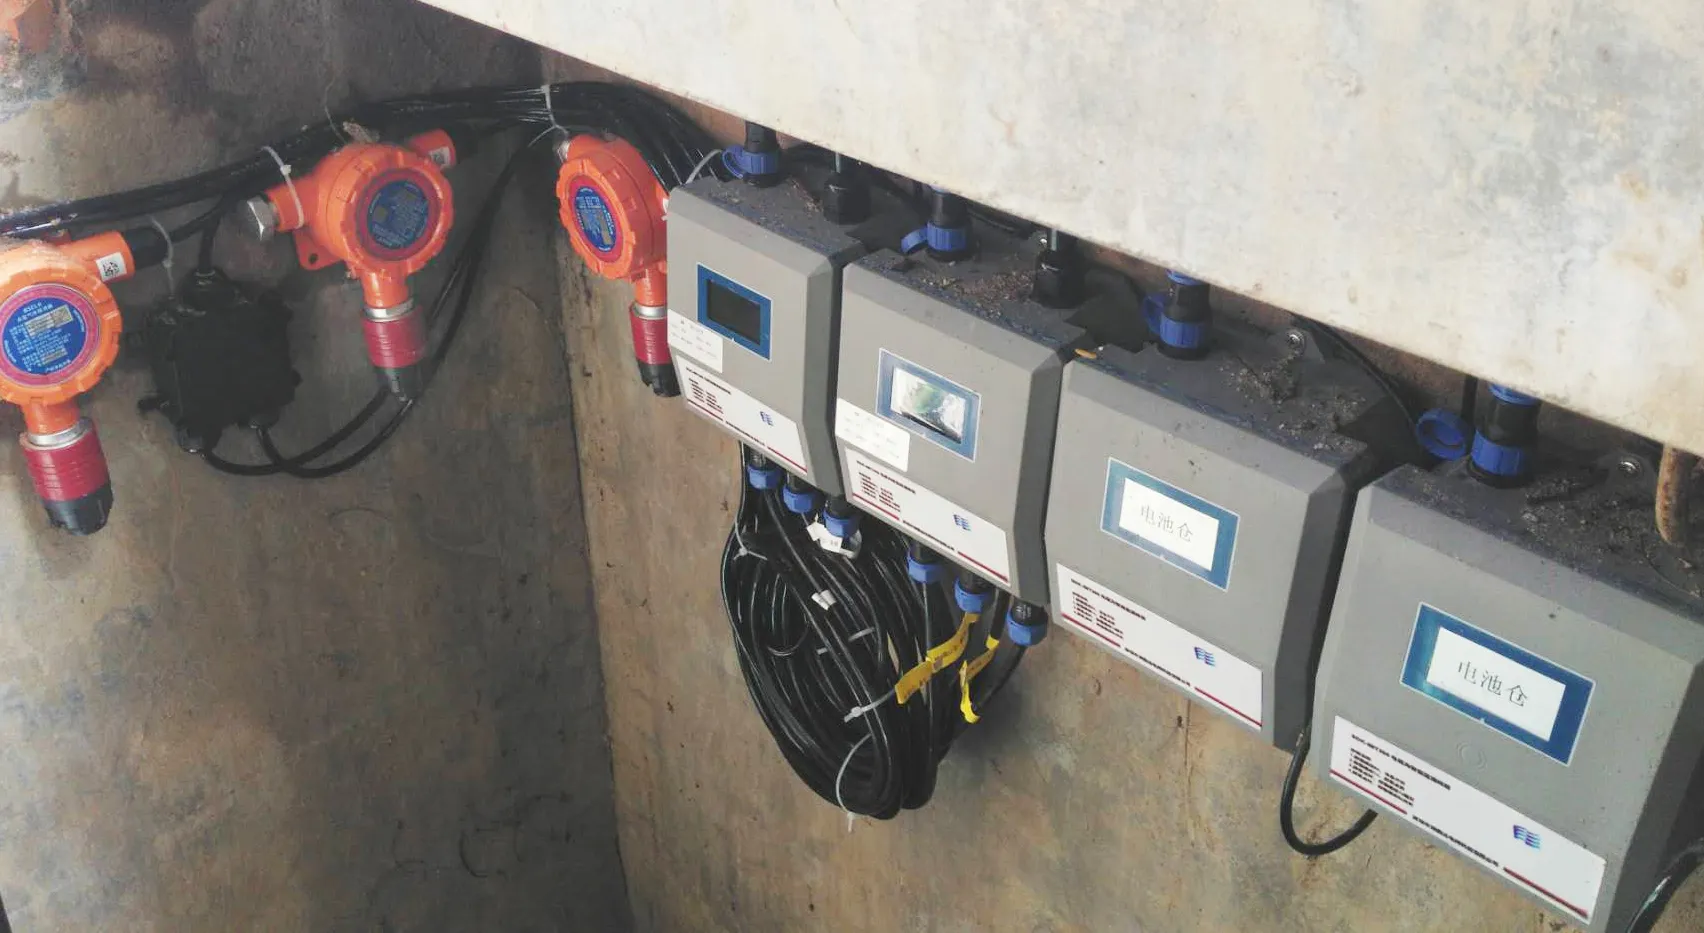 Monitoring of cable trench temperature, liquid level, gas, manhole cover